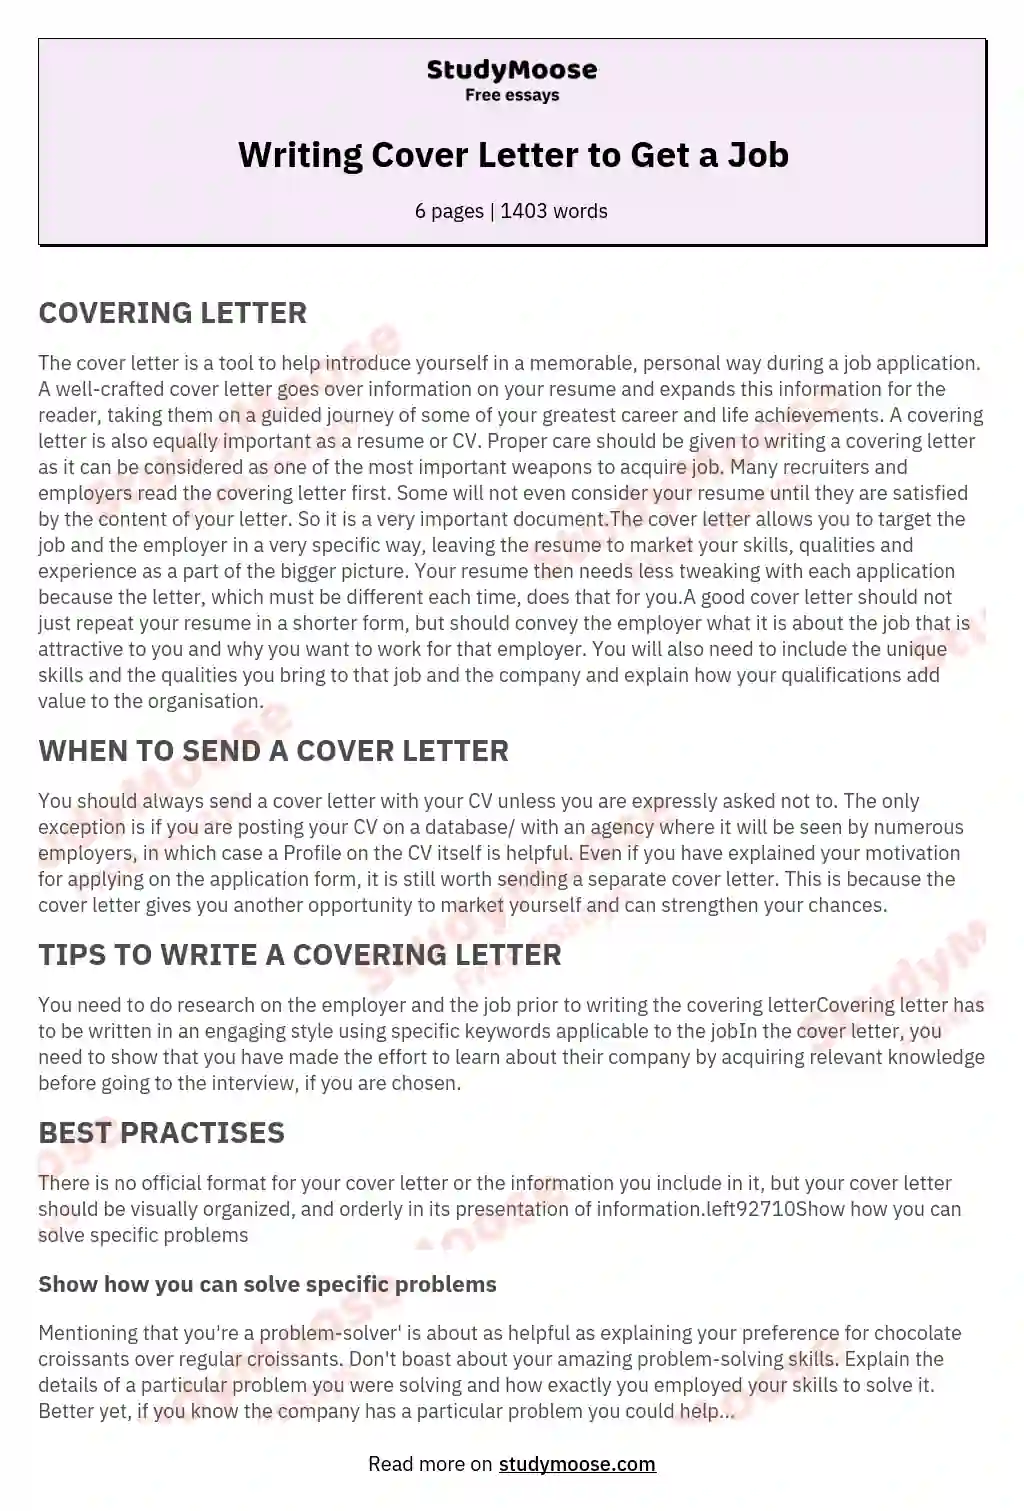 Writing Cover Letter to Get a Job essay